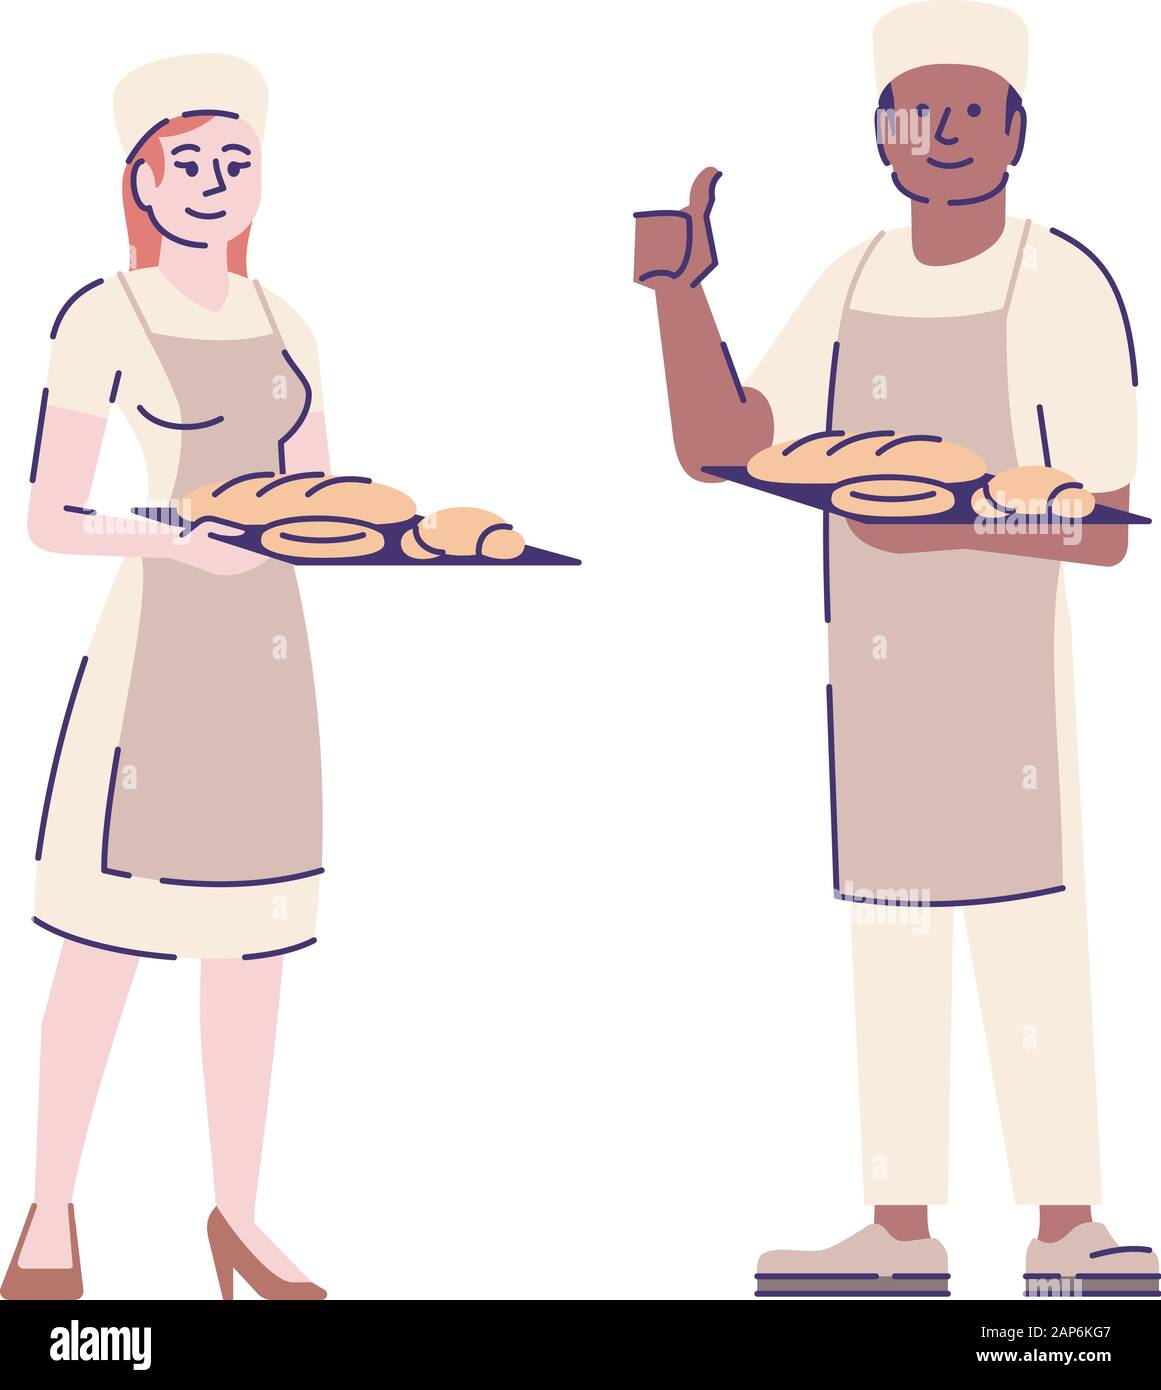 Bakers Couple Flat Vector Character Restaurant Chefs Bakery Workers Cartoon Illustration With Outline Woman And Man Confectioners Holding Tray With Stock Vector Image Art Alamy